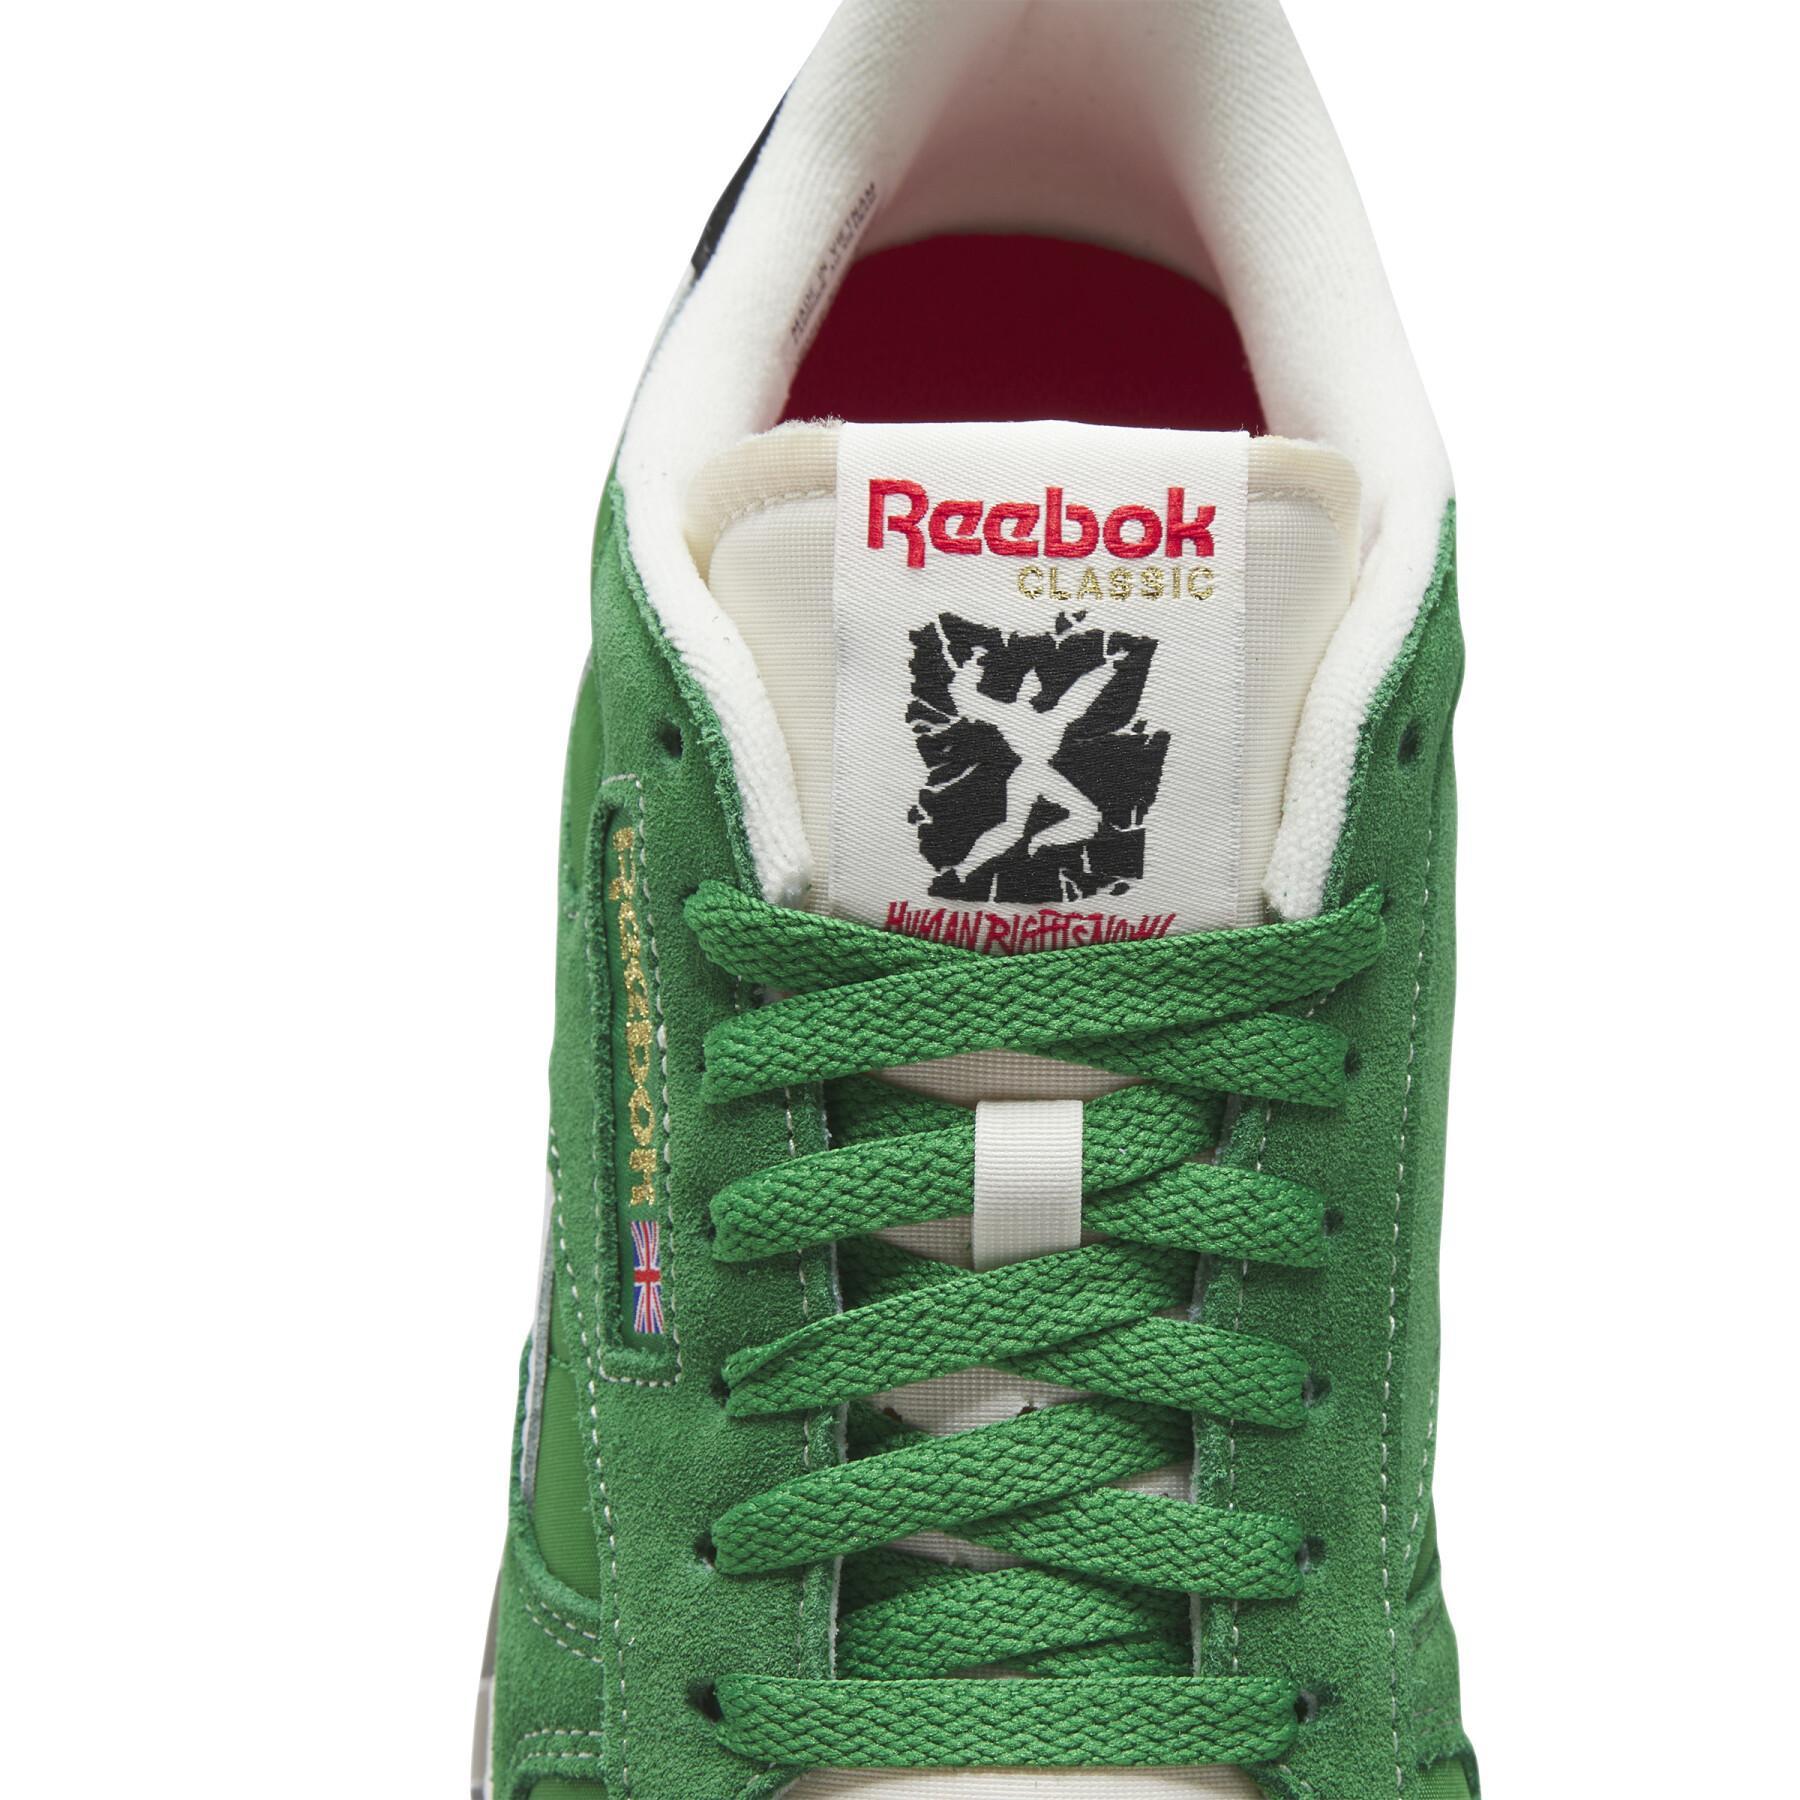 Leather sneakers Reebok Classic